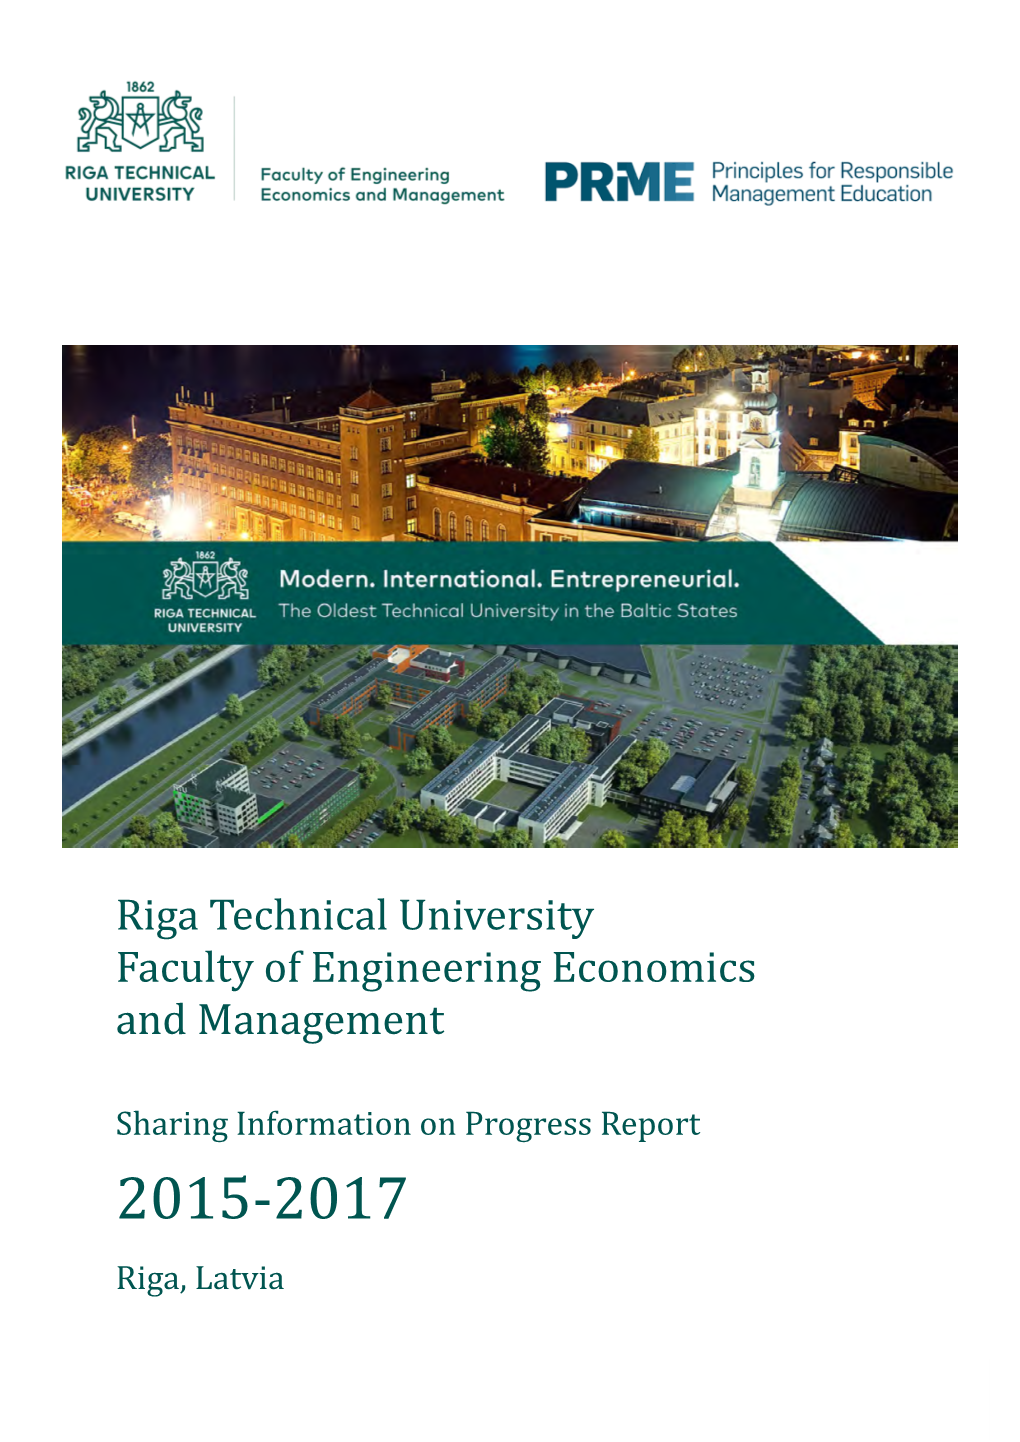 Riga Technical University Faculty of Engineering Economics and Management